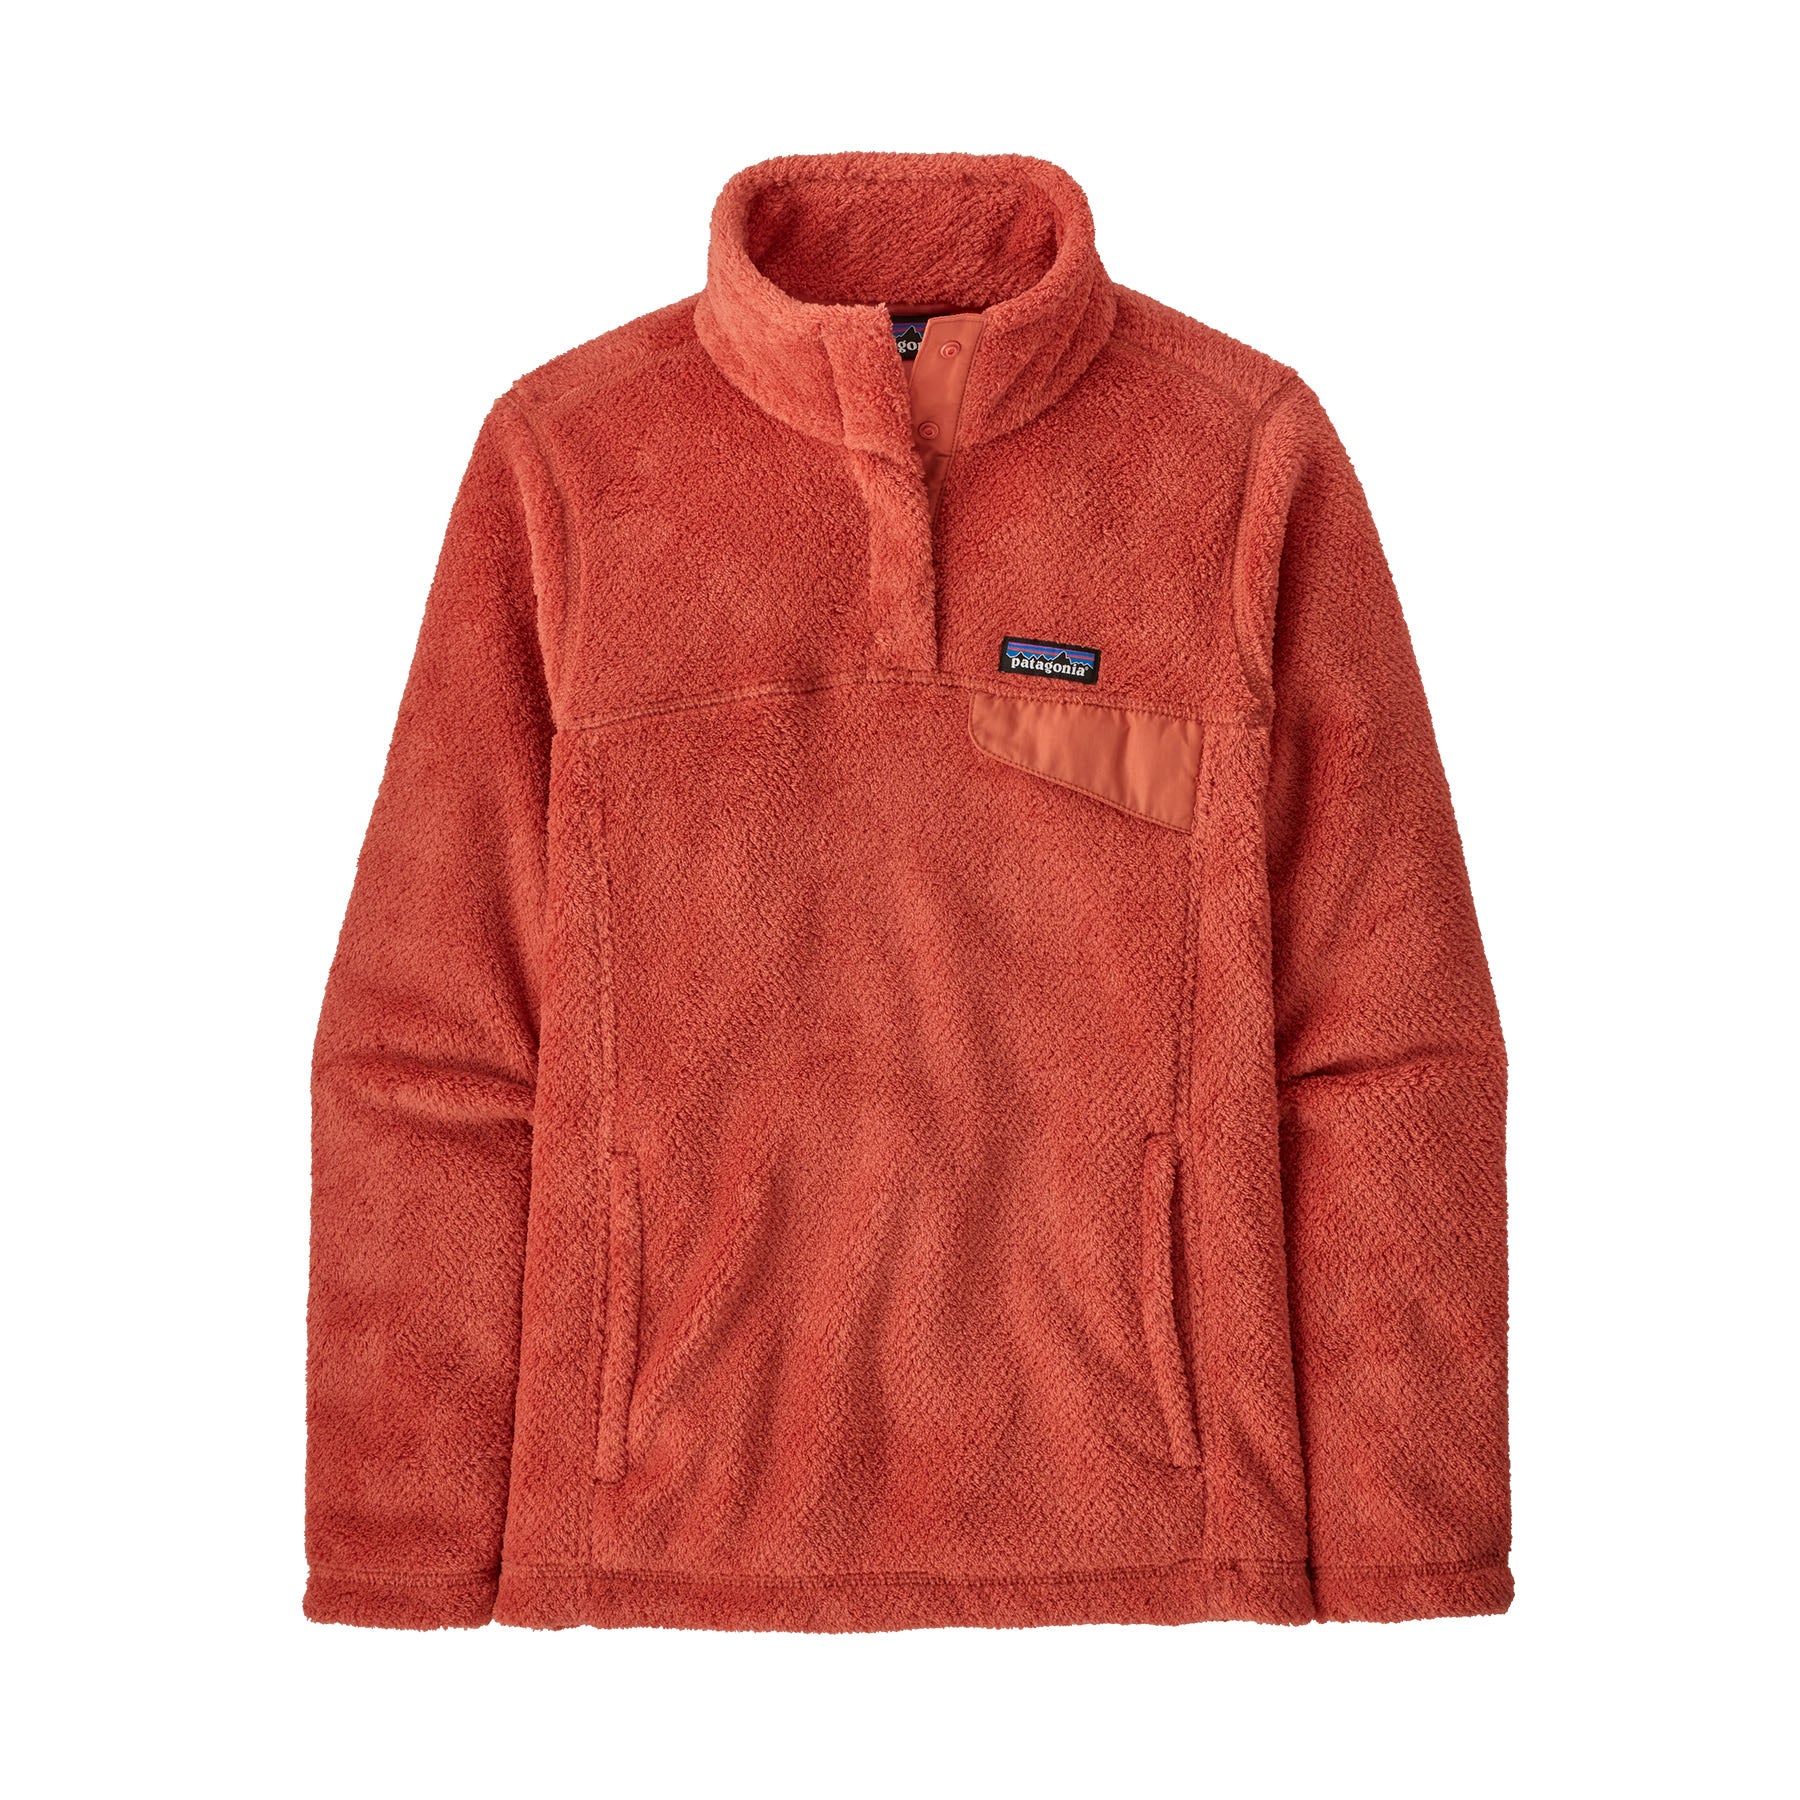 New Women's Fleece by Patagonia